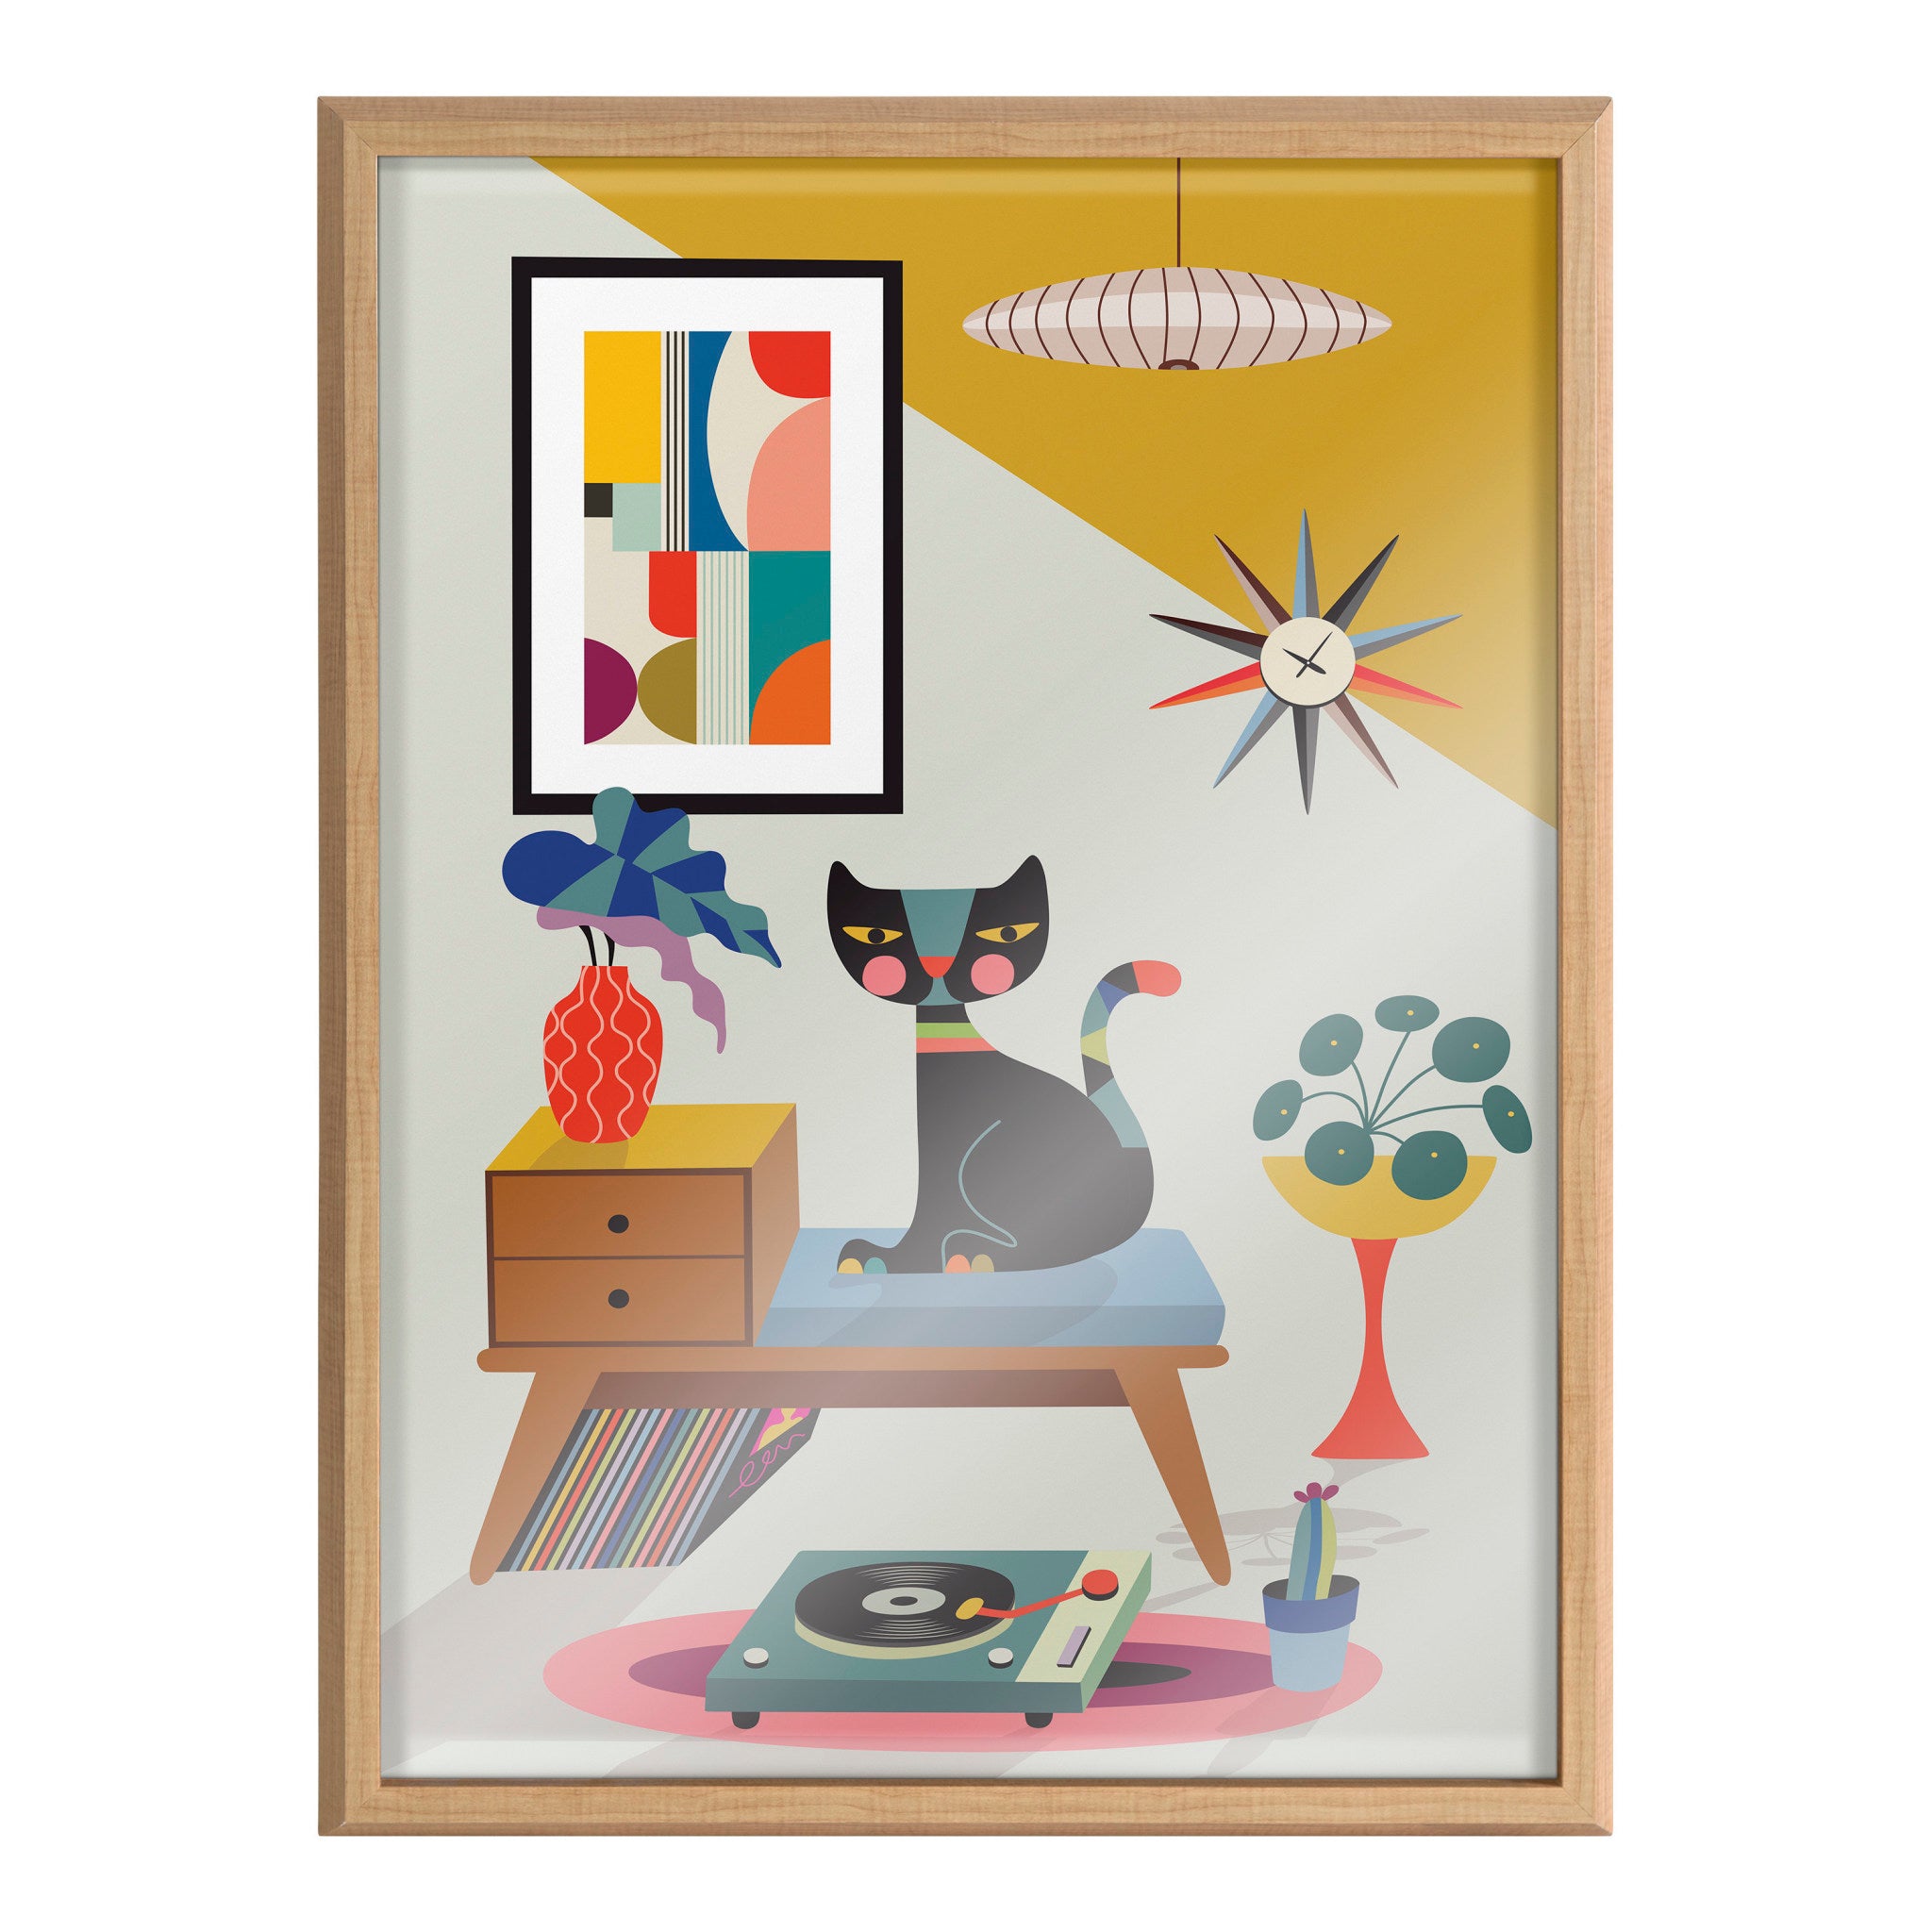 Blake Record Player Framed Printed Art by Rachel Lee of My Dream Wall